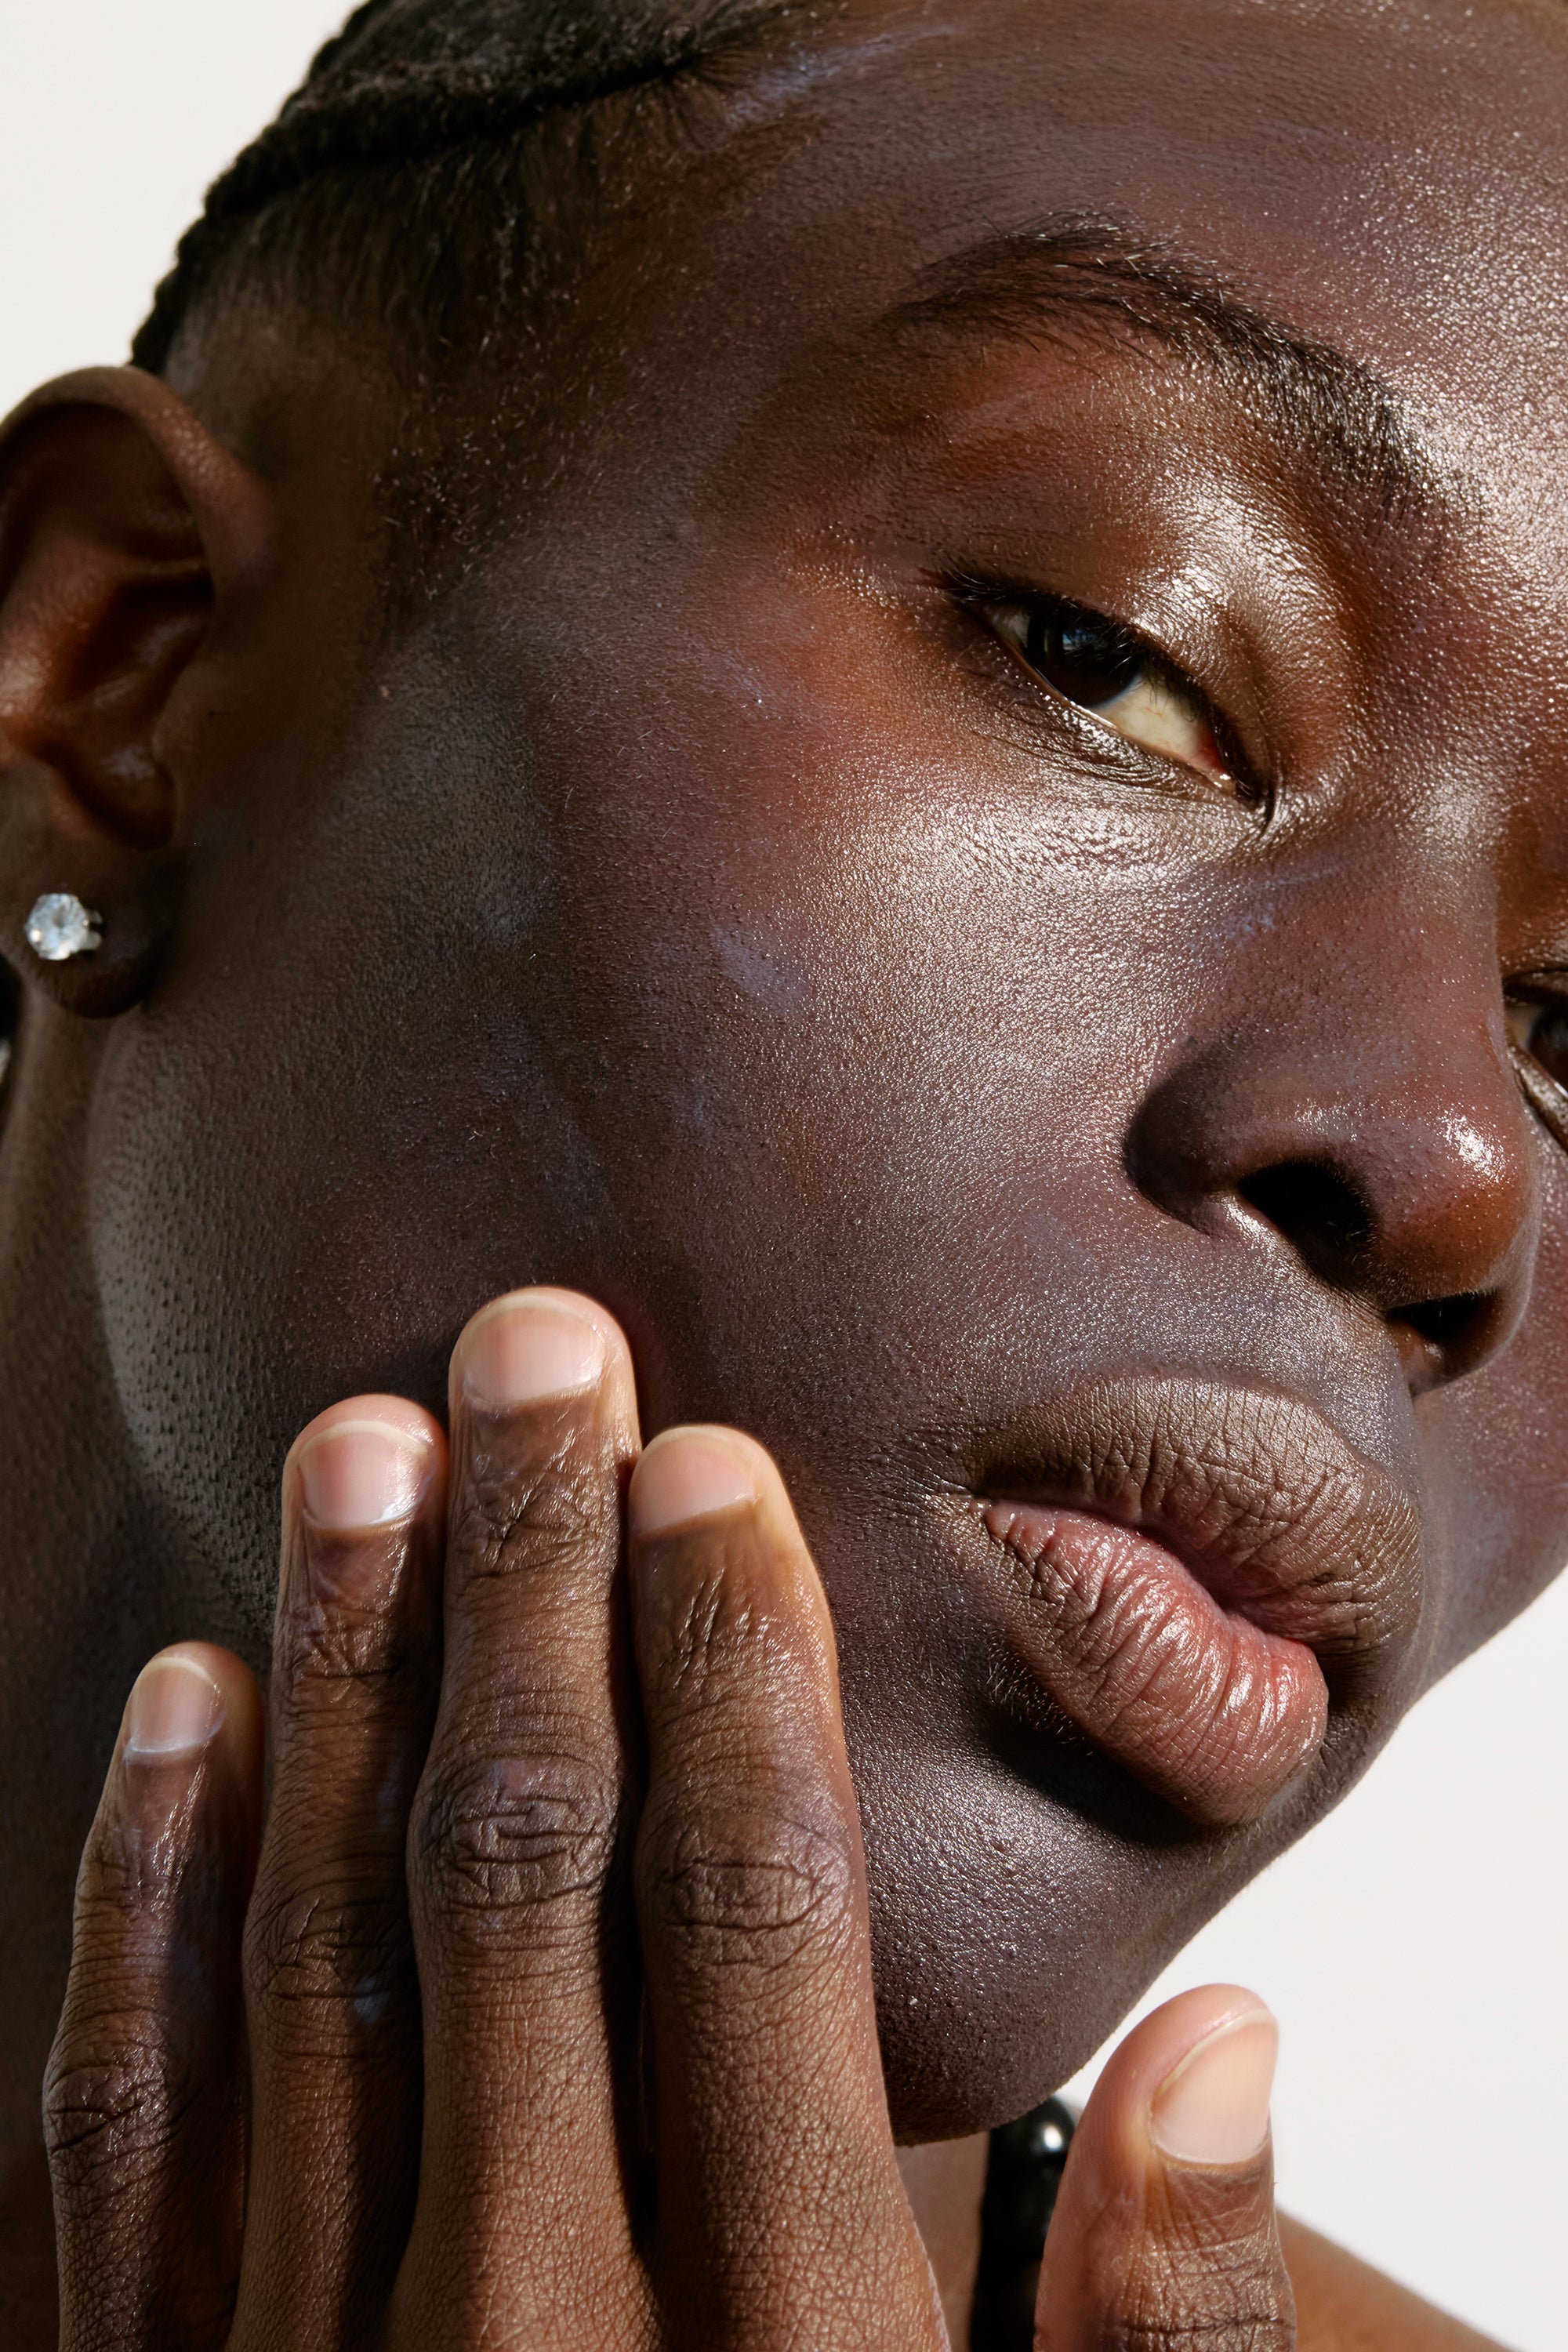 Close-up of a person with dark skin, short braided hair, and a small diamond earring. They are gently touching their cheek with well-groomed nails. The lighting highlights their smooth, dewy complexion thanks to the Freaks of Nature Skincare Daily System and subtle shimmer on their eyelids.